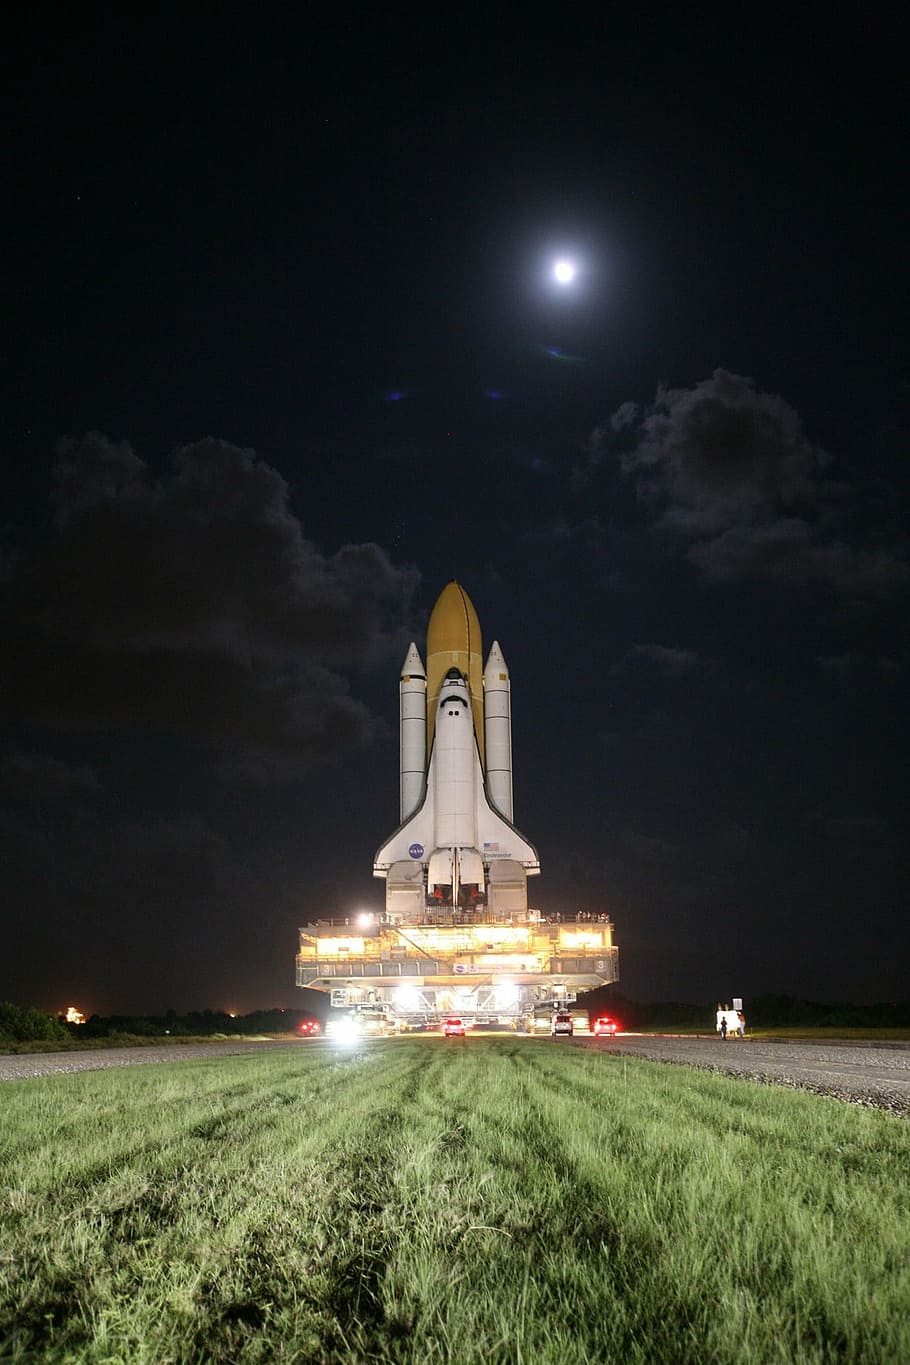 space shuttle, grass, rollout, moon, waning, stars, night, launch, pad, endeavour